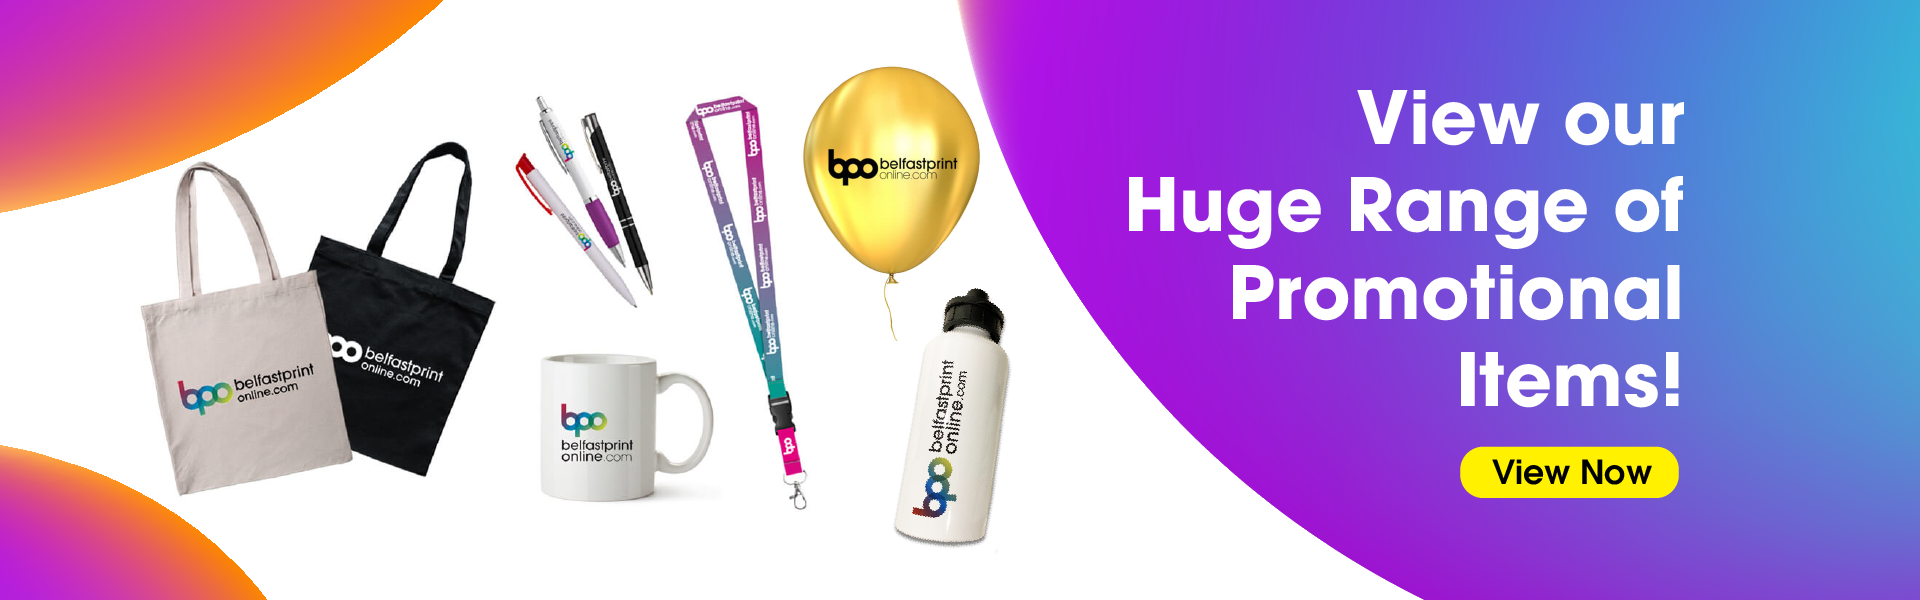 View our Huge Range of Promotional Items at Belfast Print Online